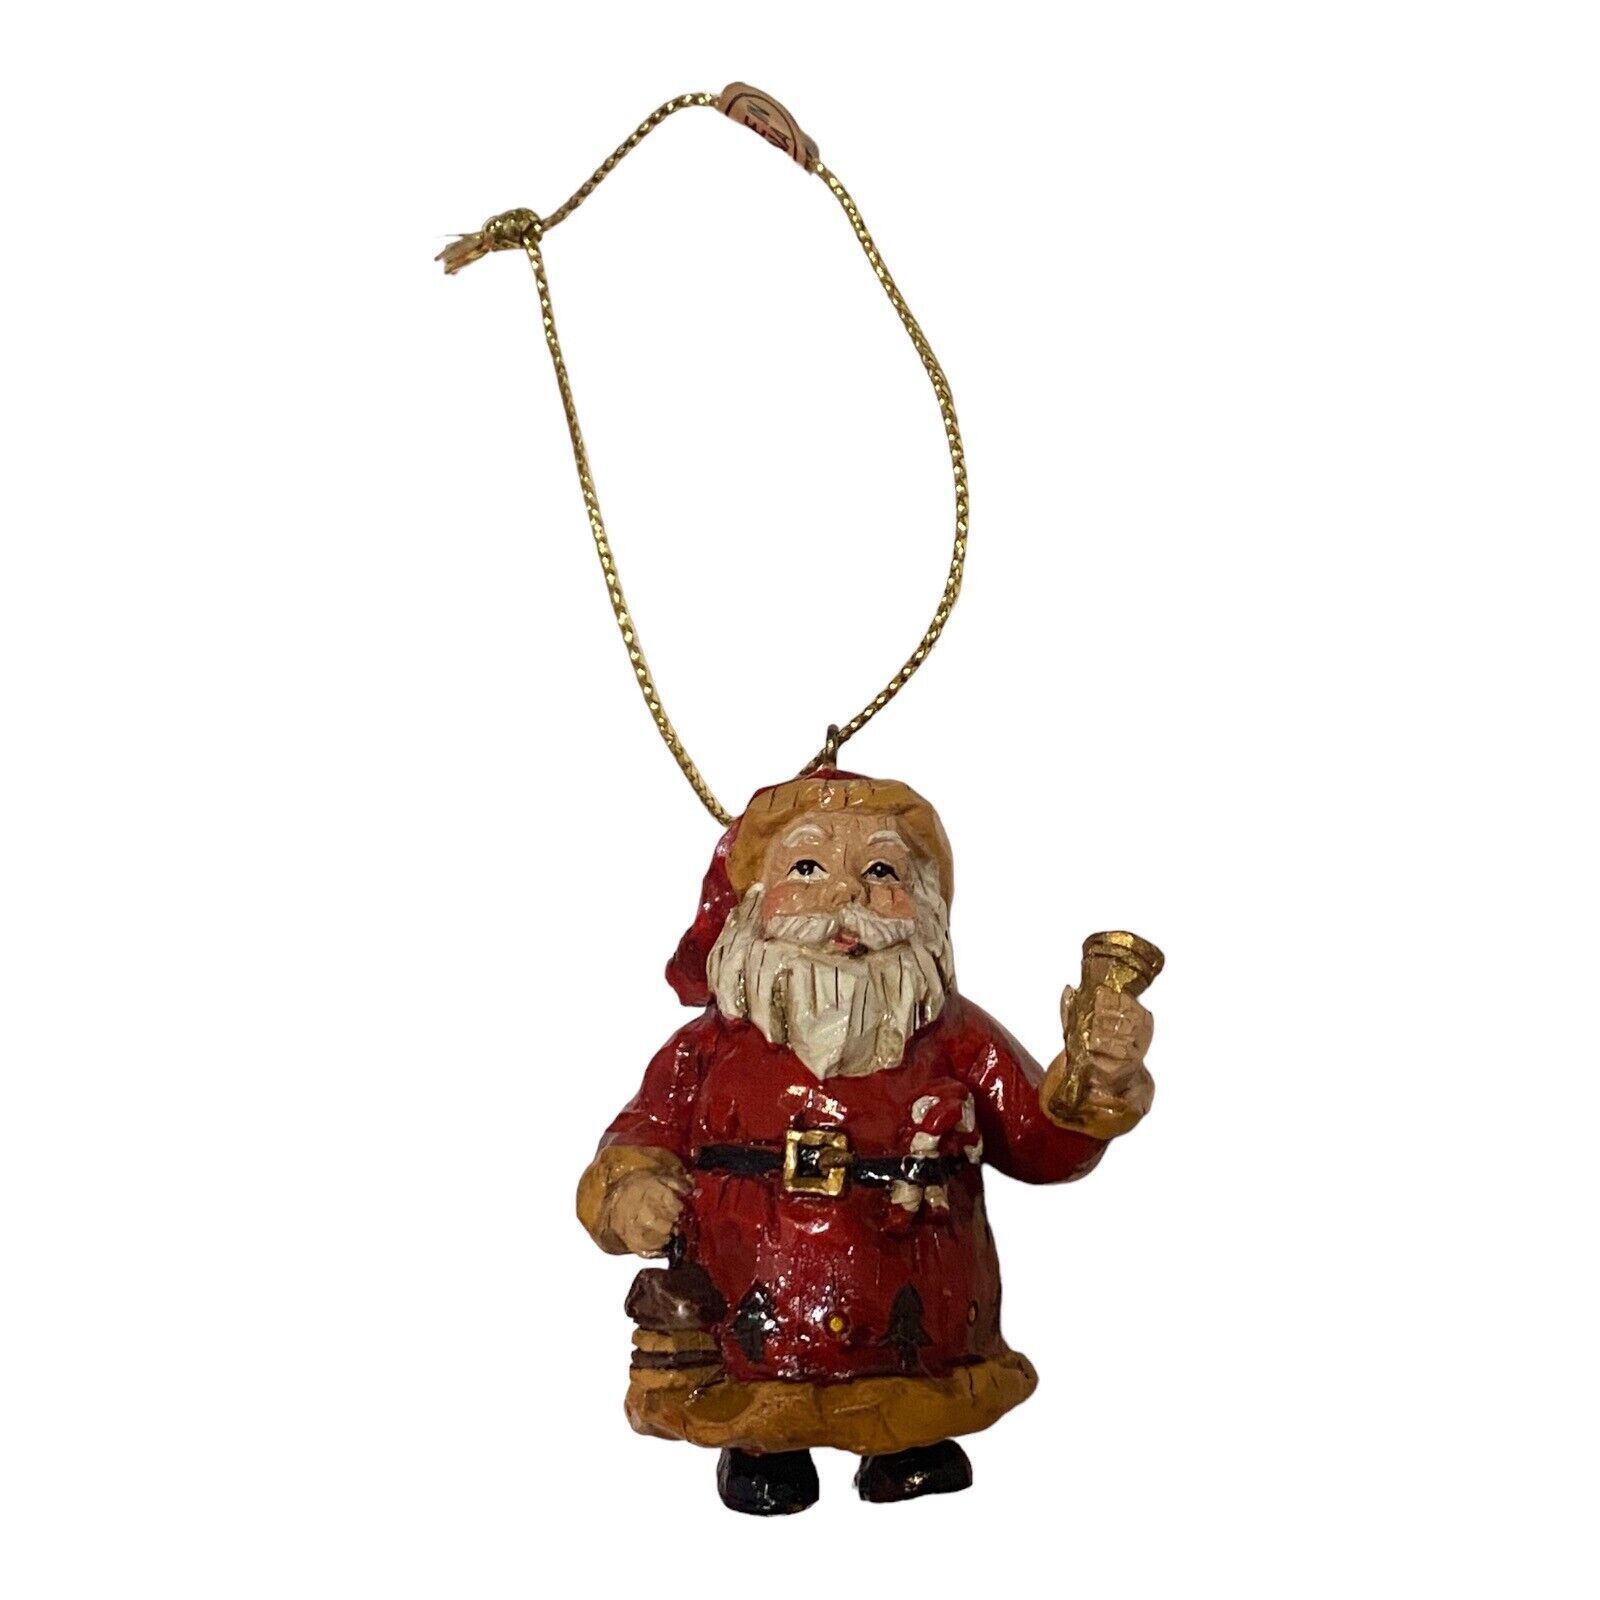 VTG Old World Santa Claus Christmas Ornament 2” Hand Carved Painted Wood Resin